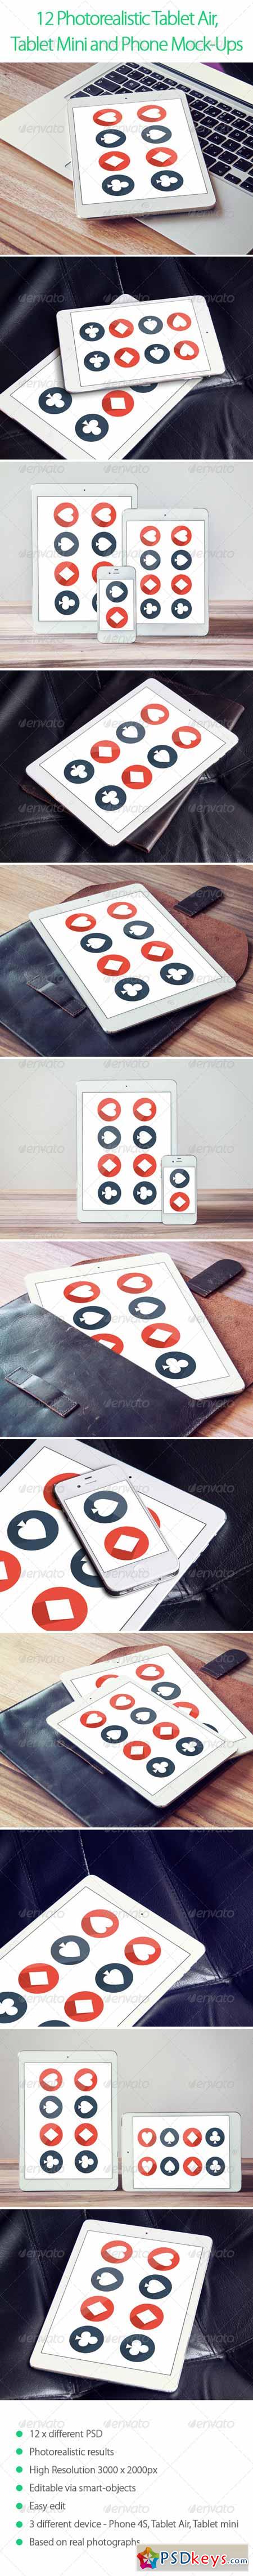 12 Photorealistic Tablet and Phone Mock-Ups 6064123